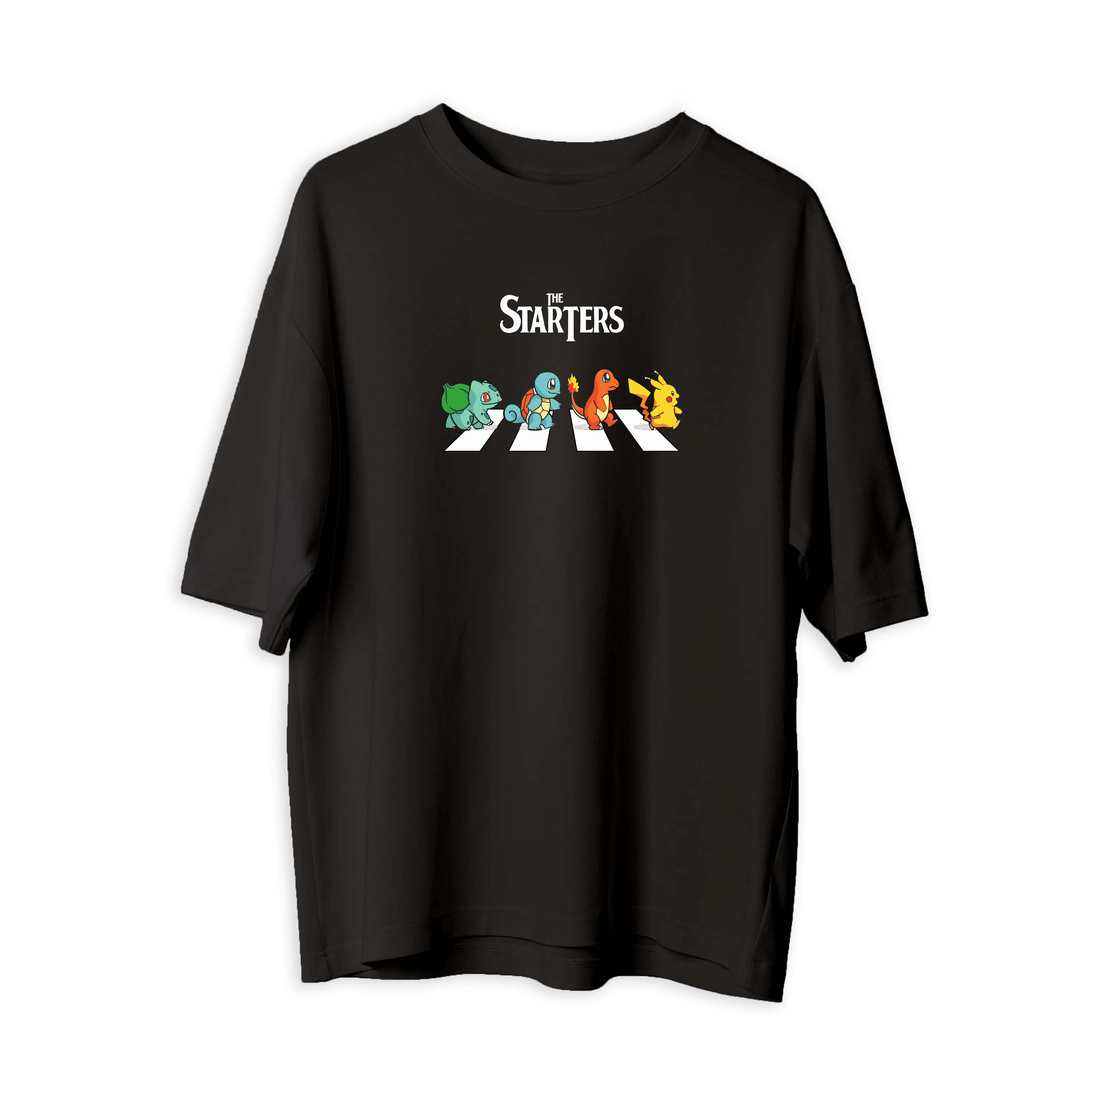 The Starters - Oversize T-Shirt